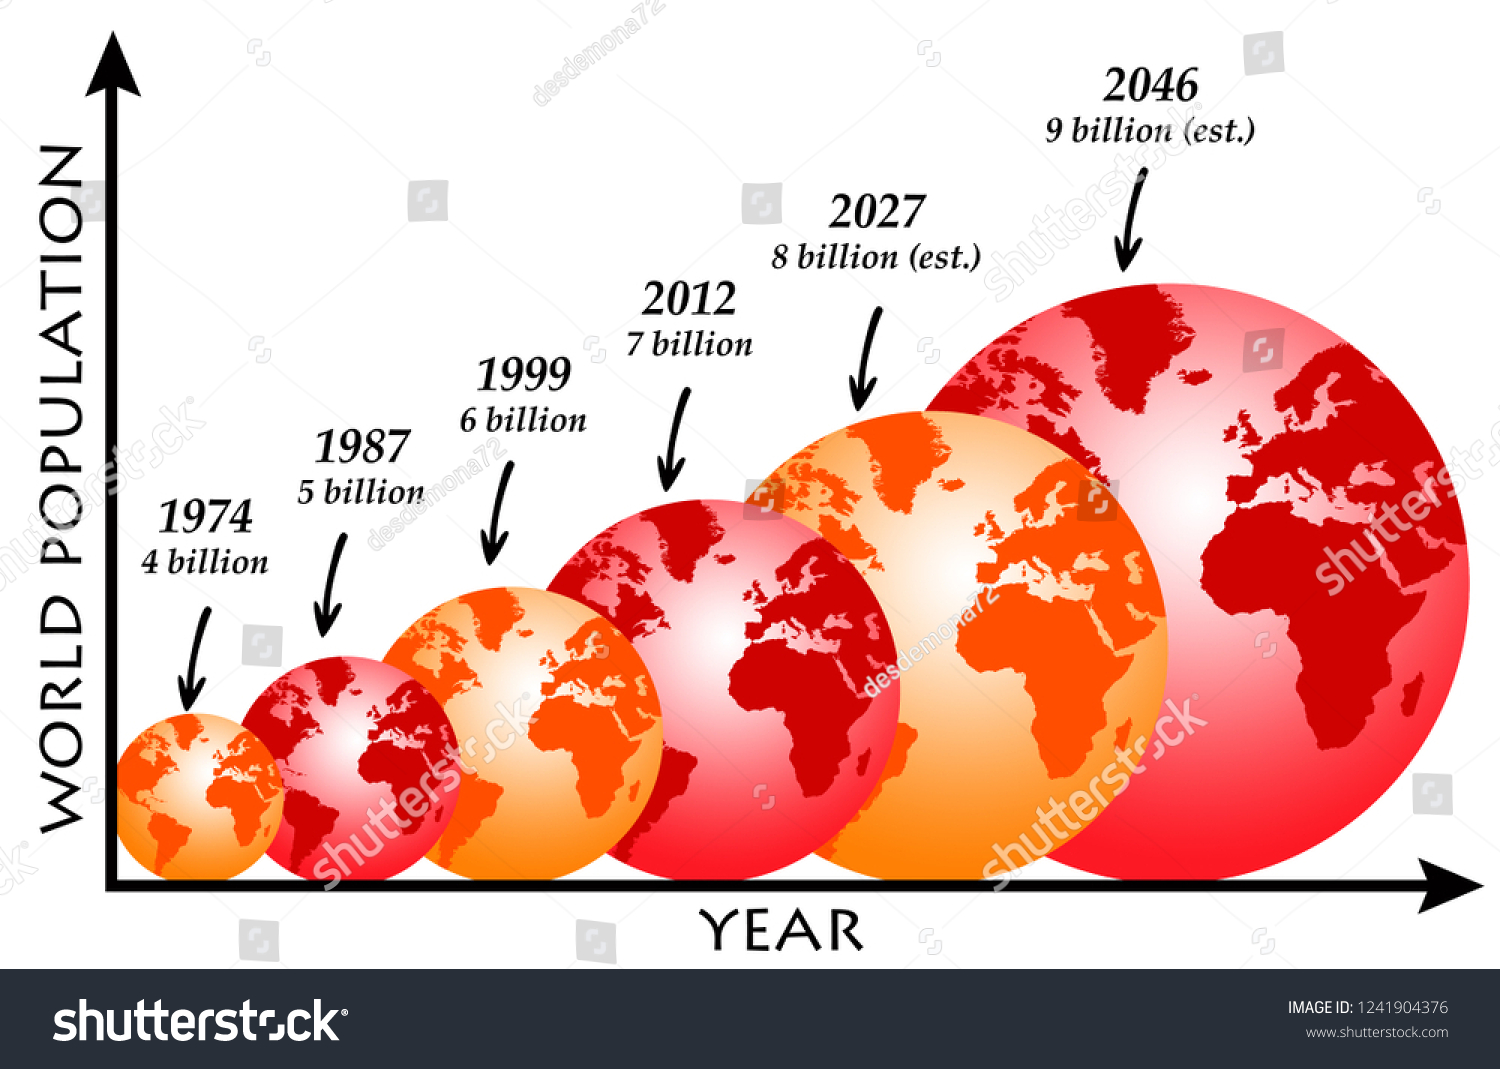 4,836 World population growth Images, Stock Photos & Vectors Shutterstock